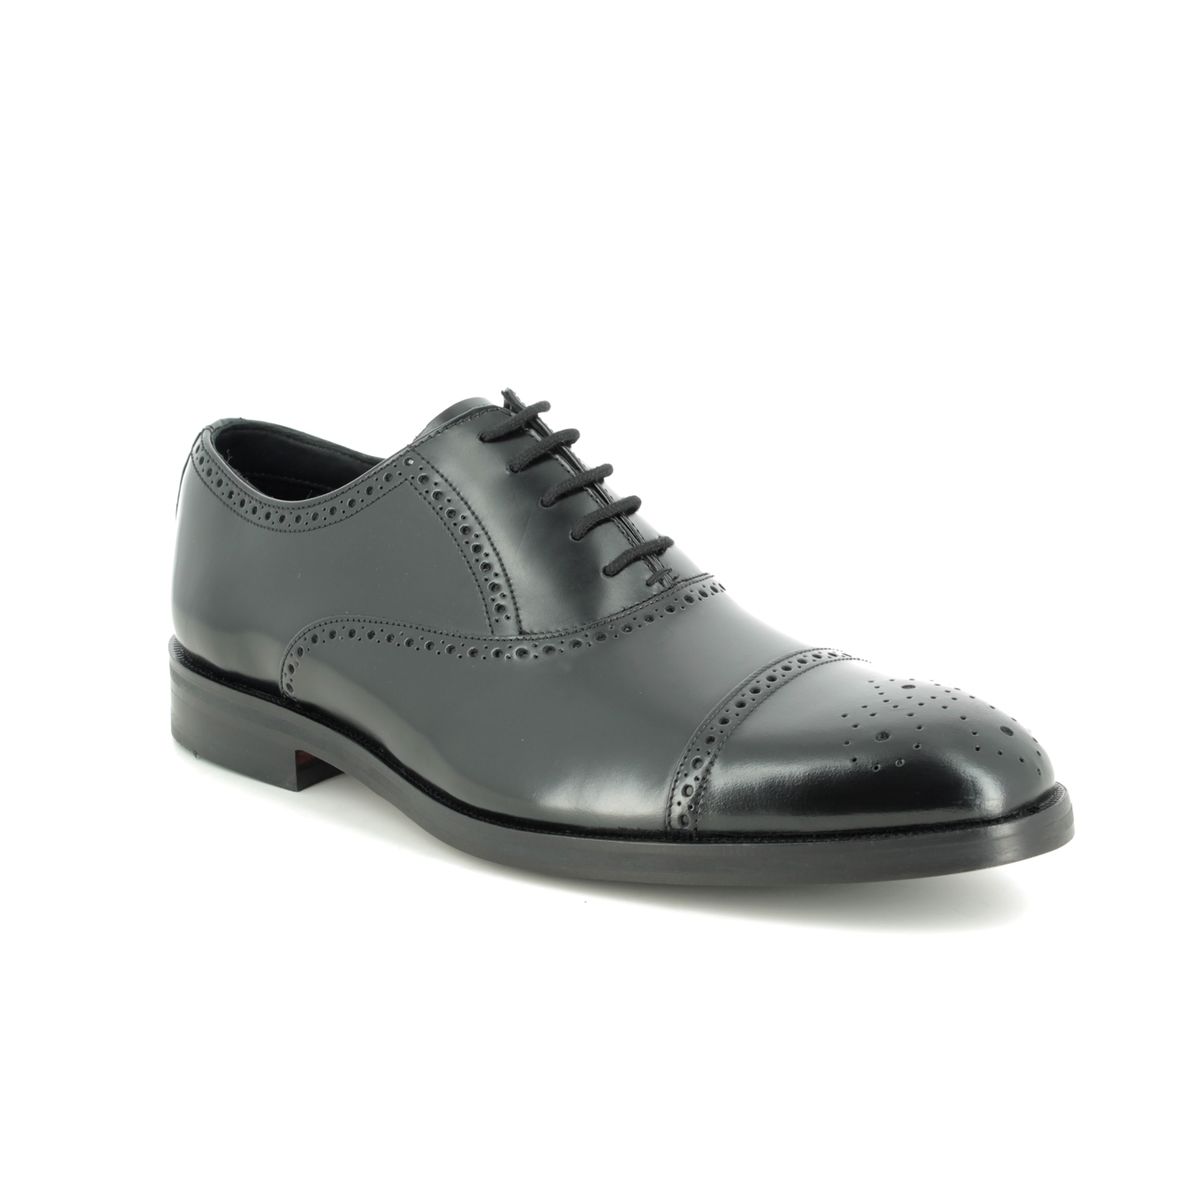 Clarks Oliver Limit Black Leather Mens Brogues 436467G In Size 11 In Plain Black Leather G Width Fitting